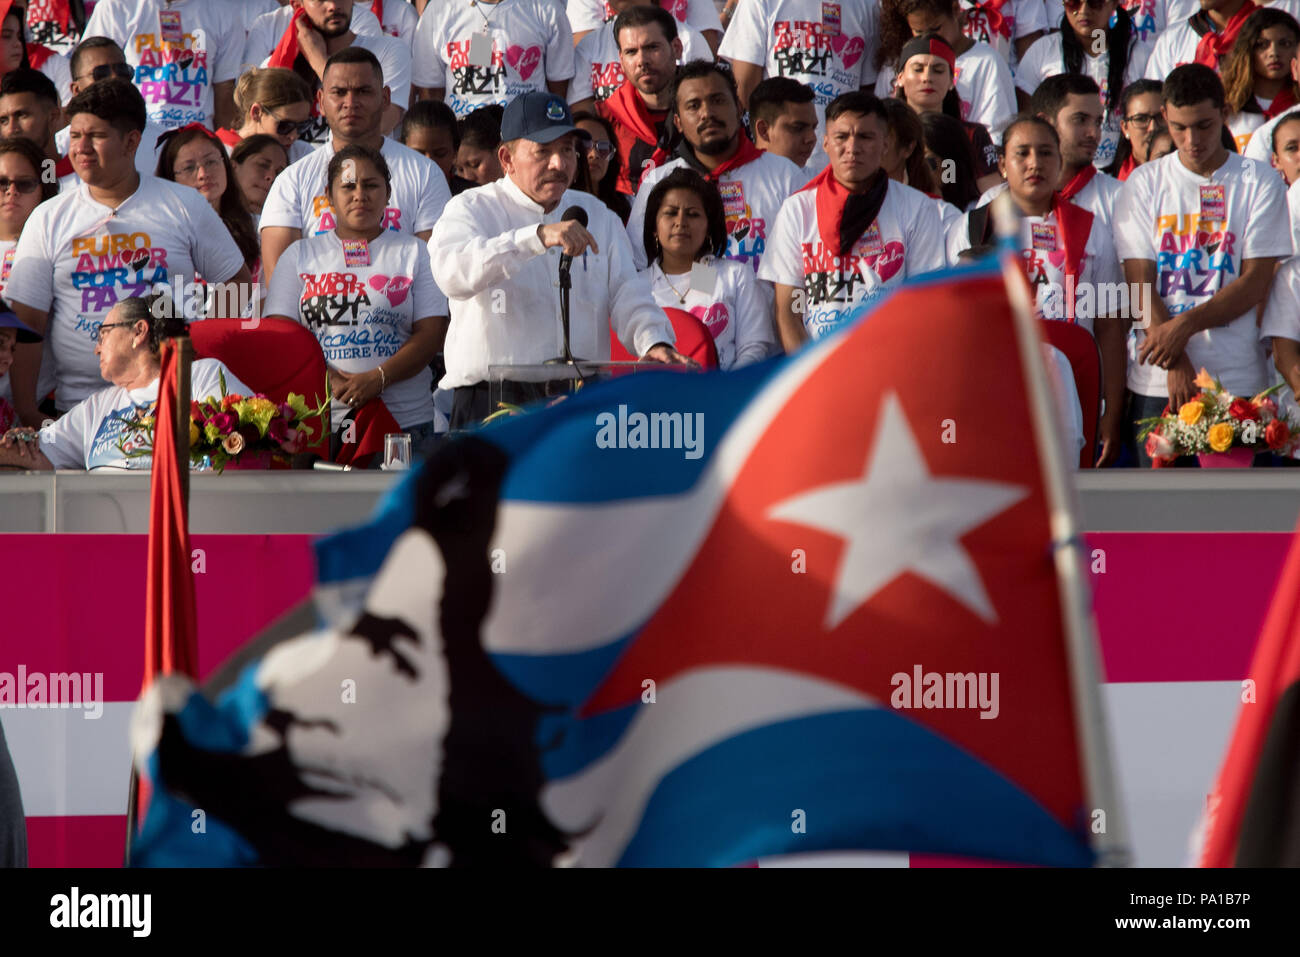 Managua, Nicaragua. 19th July, 2018. President Daniel Ortega (C) speaking to supporters during an event in conmemoration of the 39th anniversary of the Sandinista revolution. The Nicaraguan president has accused the country's Catholic church of being part of an attempted coup against his government. According to Ortega, the country's Catholic bishops aren't intermediaries in the political crisis, but rather part of a putschist conspiracy. Credit: Carlos Herrera/dpa | usage worldwide/dpa/Alamy Live News Stock Photo